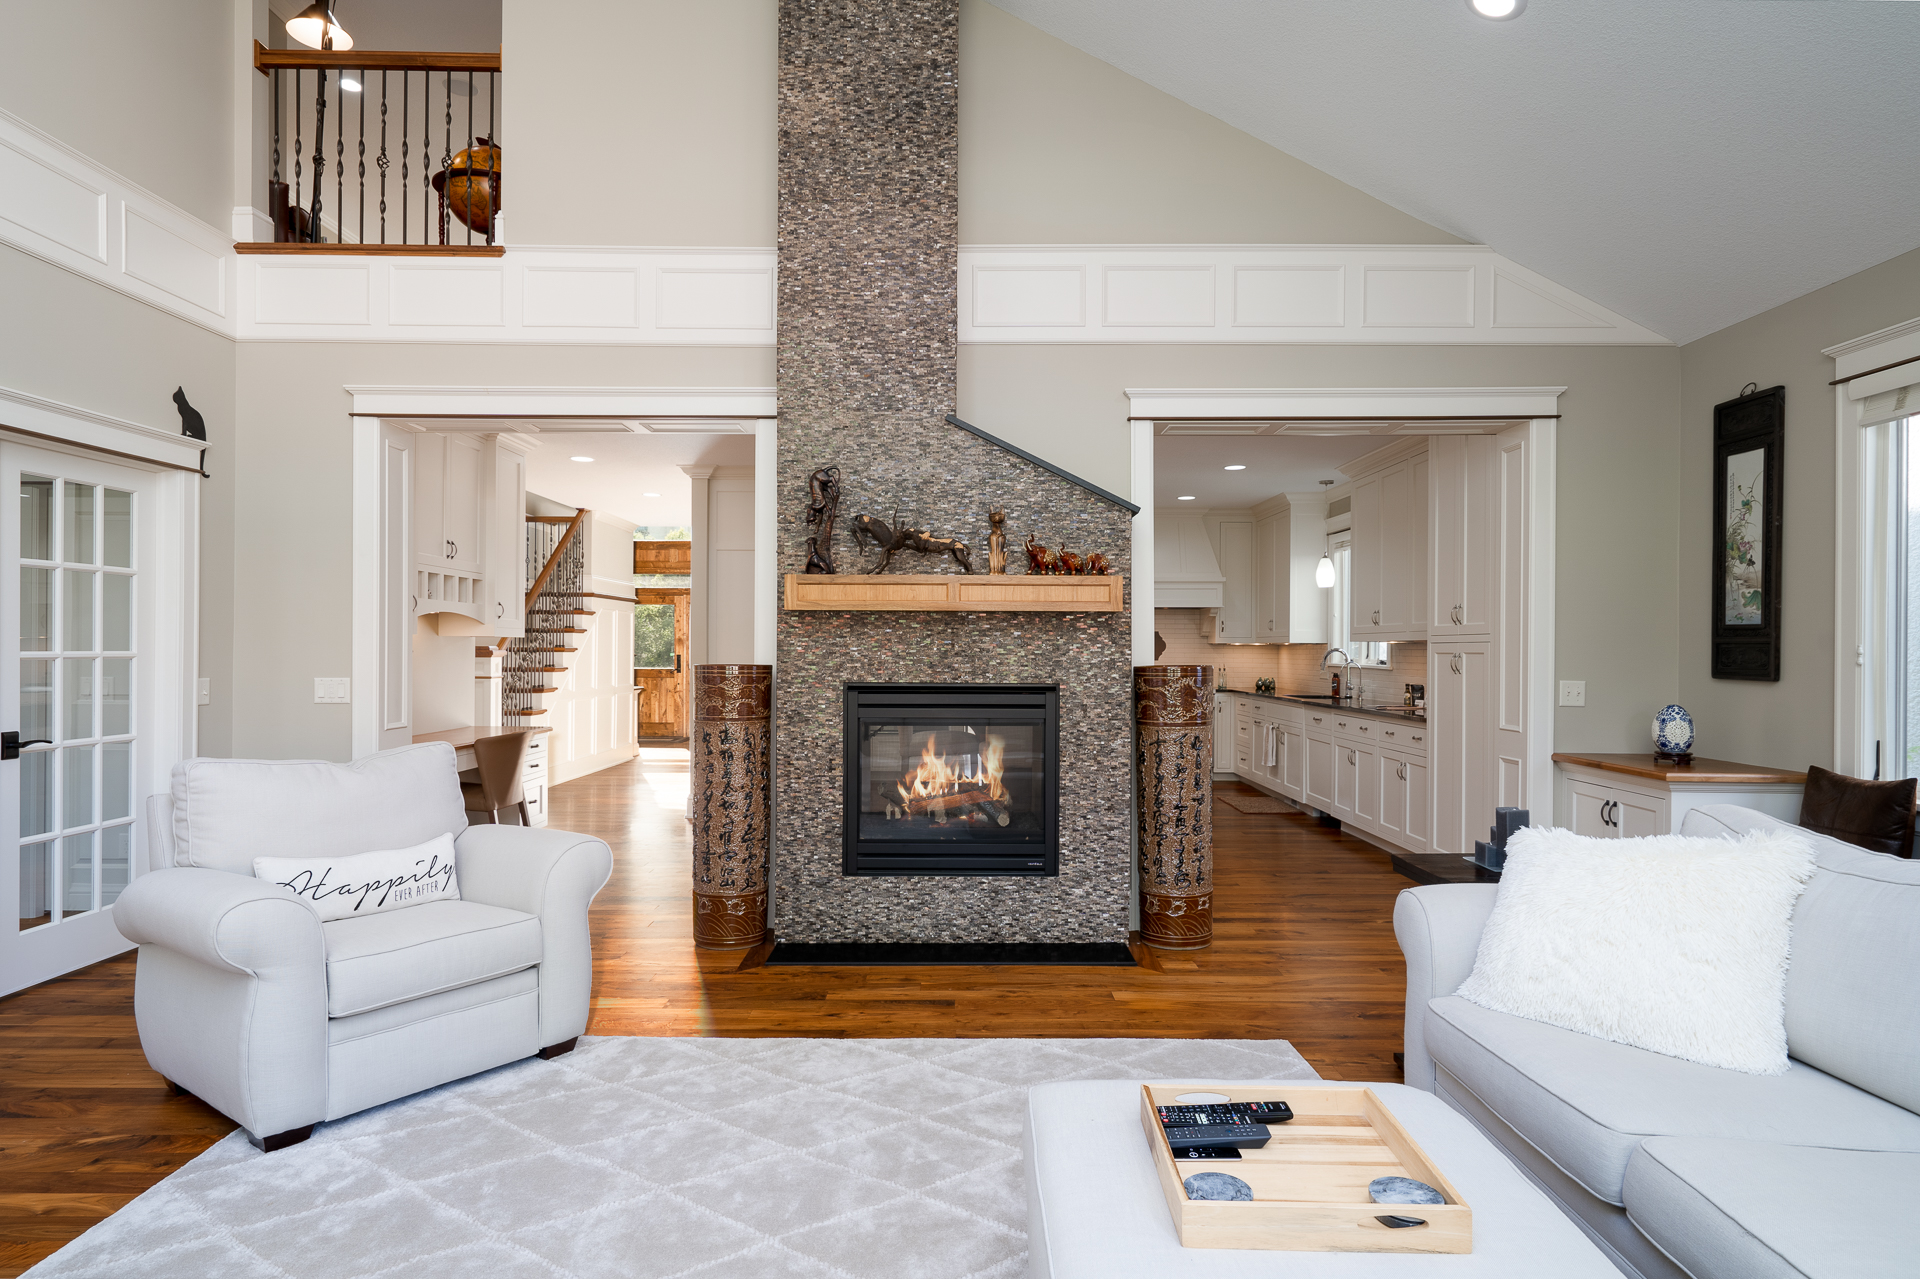 Stunning double sided fireplace.